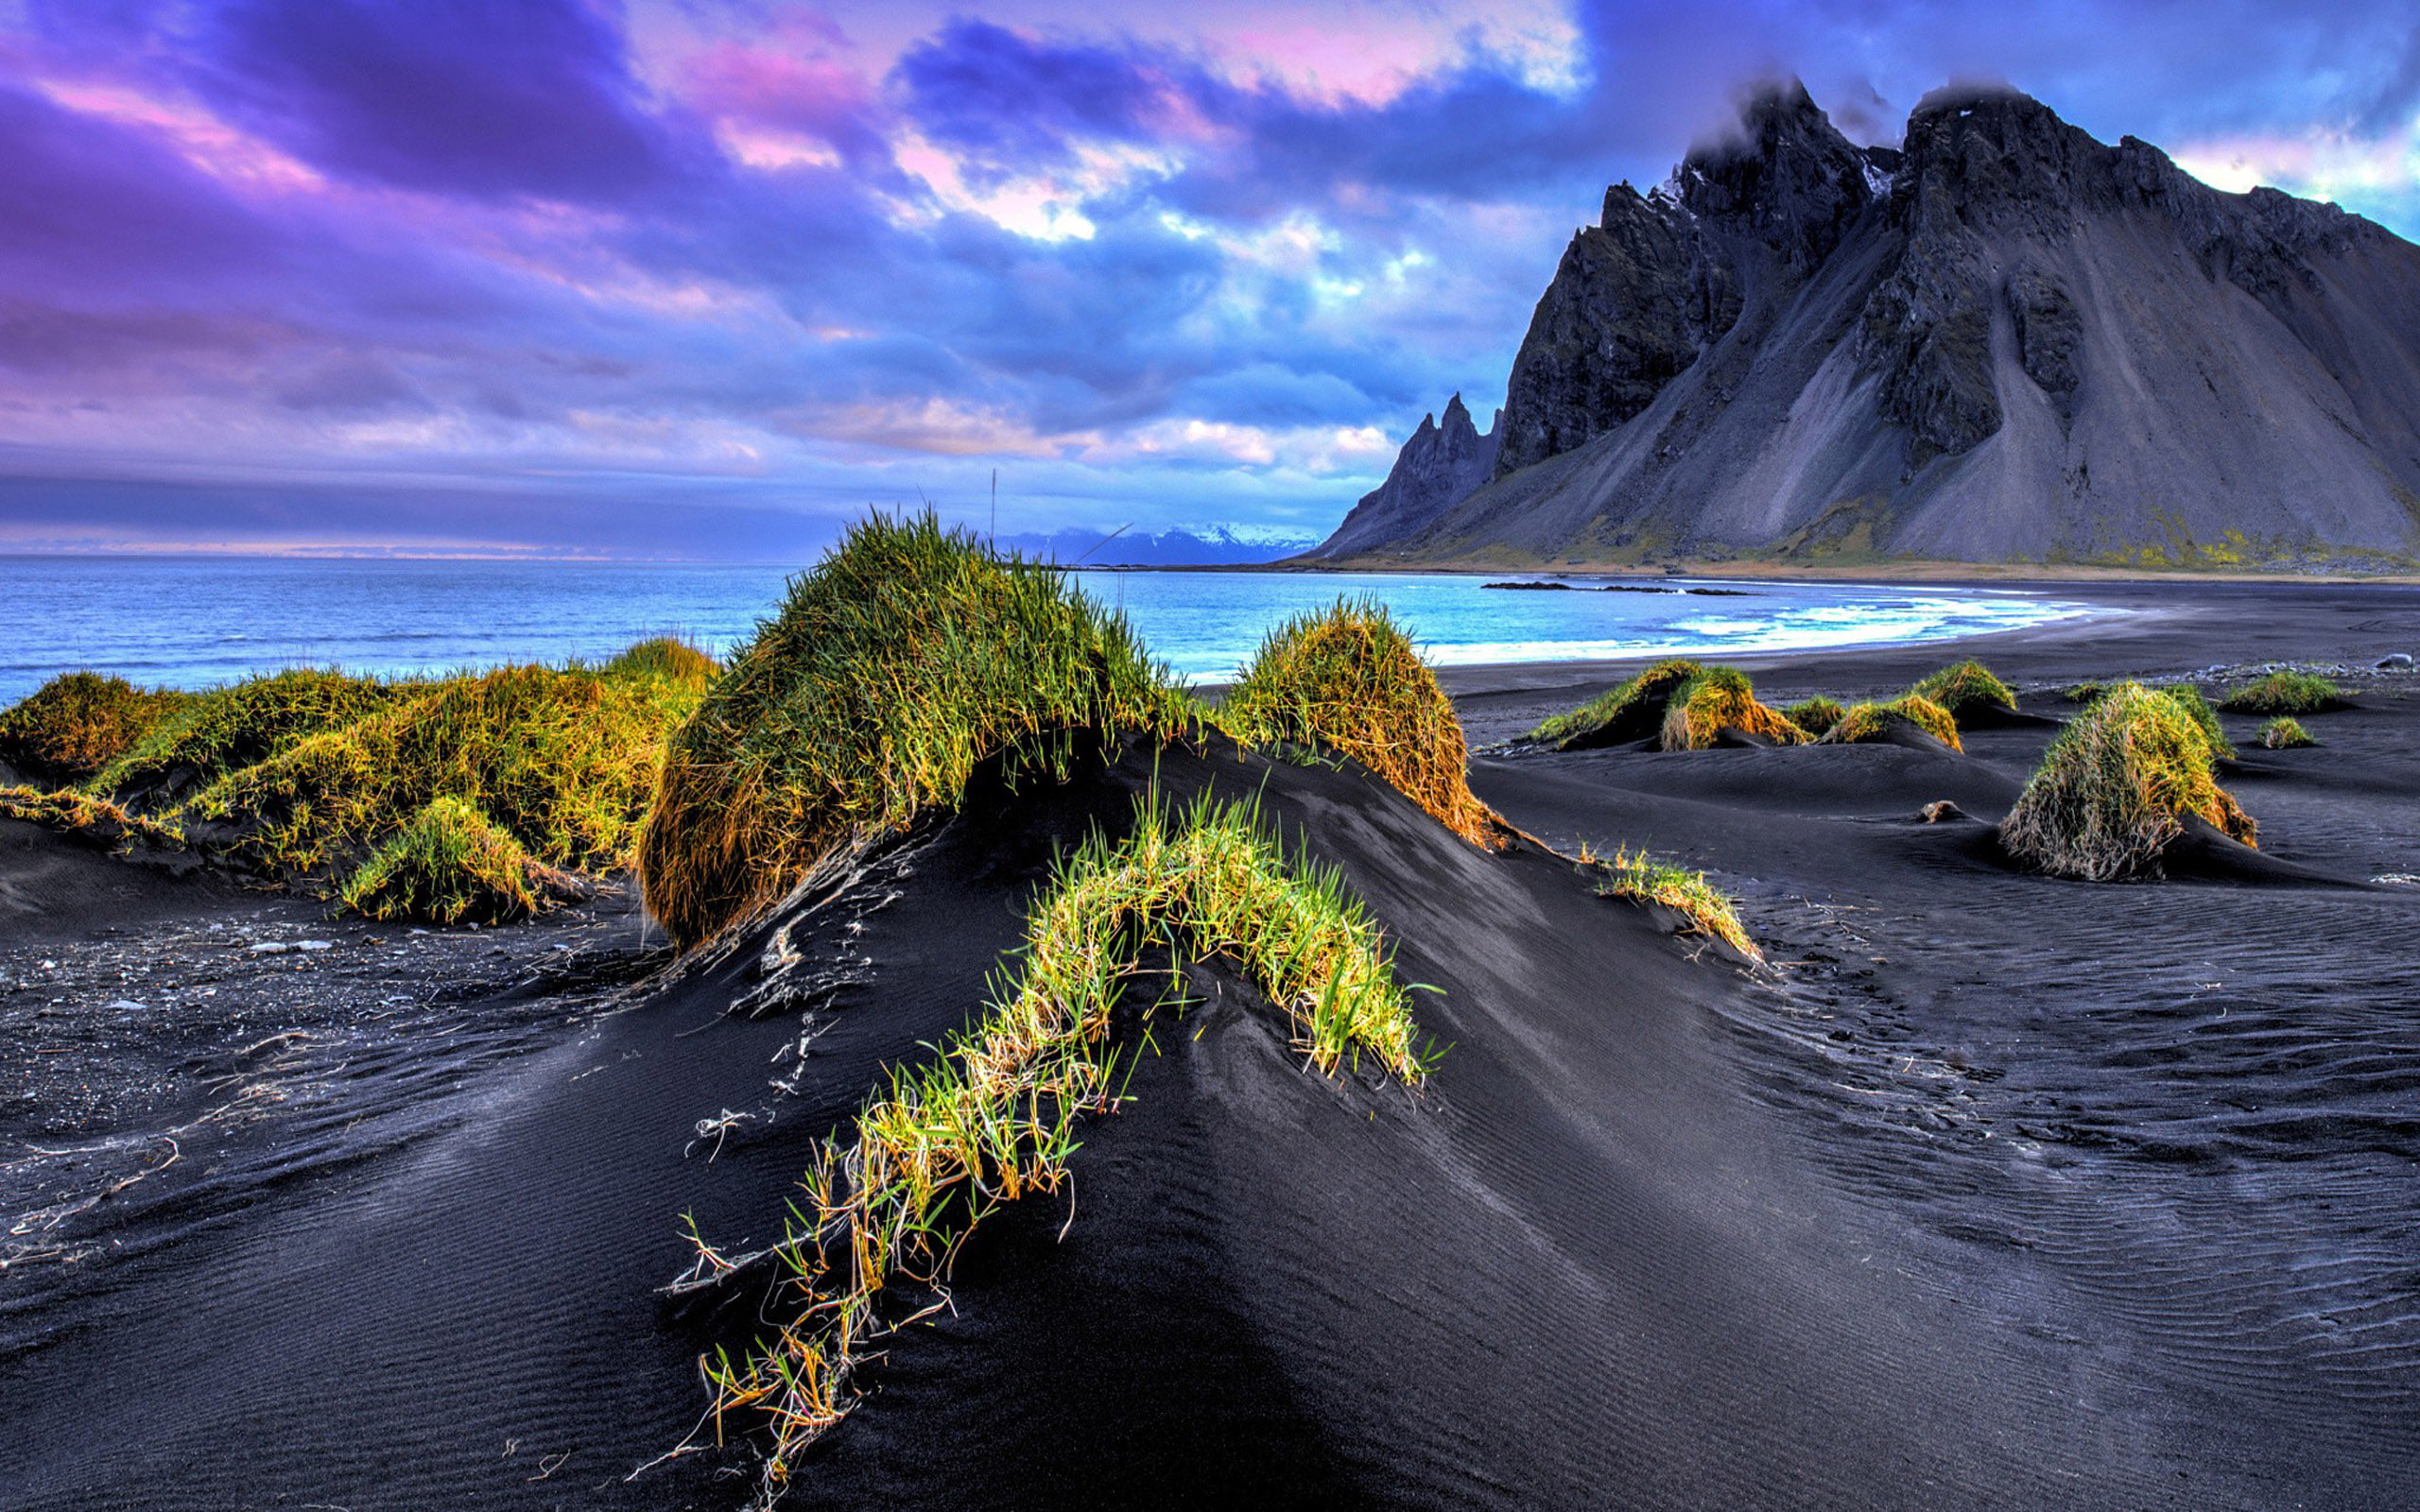 Landscape-Nature-Iceland-sandy beach-grass-black-sand-sea-rocky mountains sky with dark clouds-HD Wallpaper-2560×1600